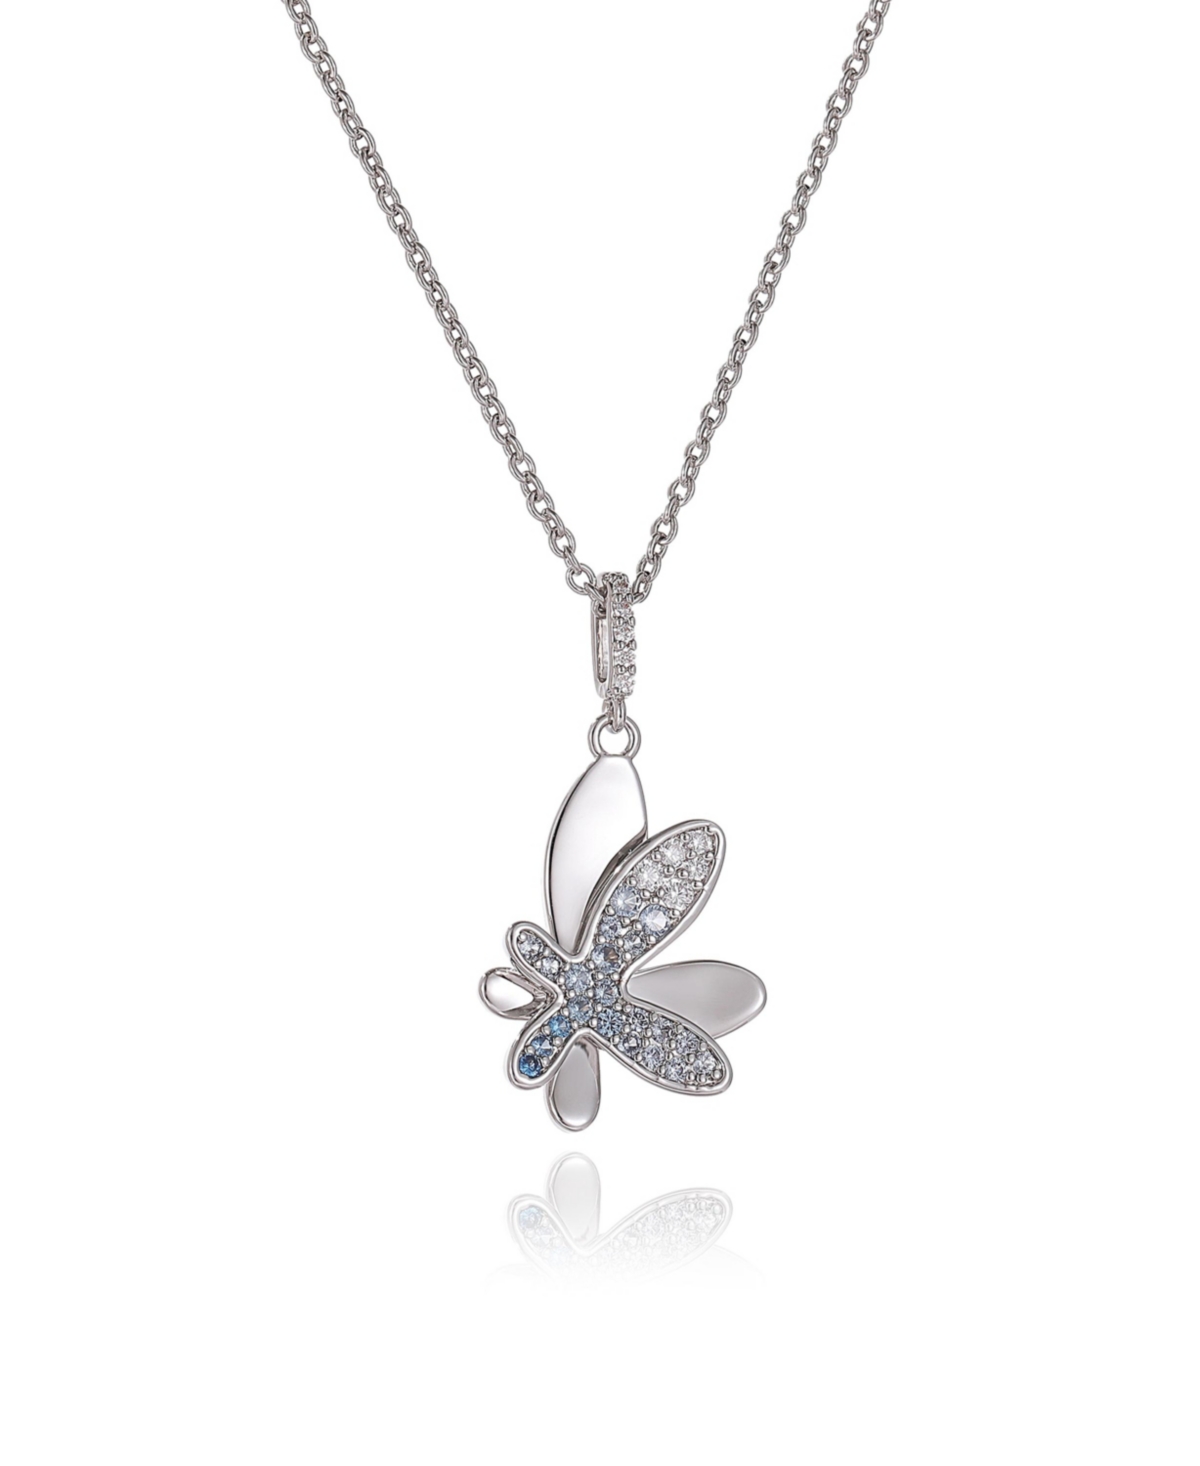 CLASSICHARMS PAVE BUTTERFLY PENDANT NECKLACE